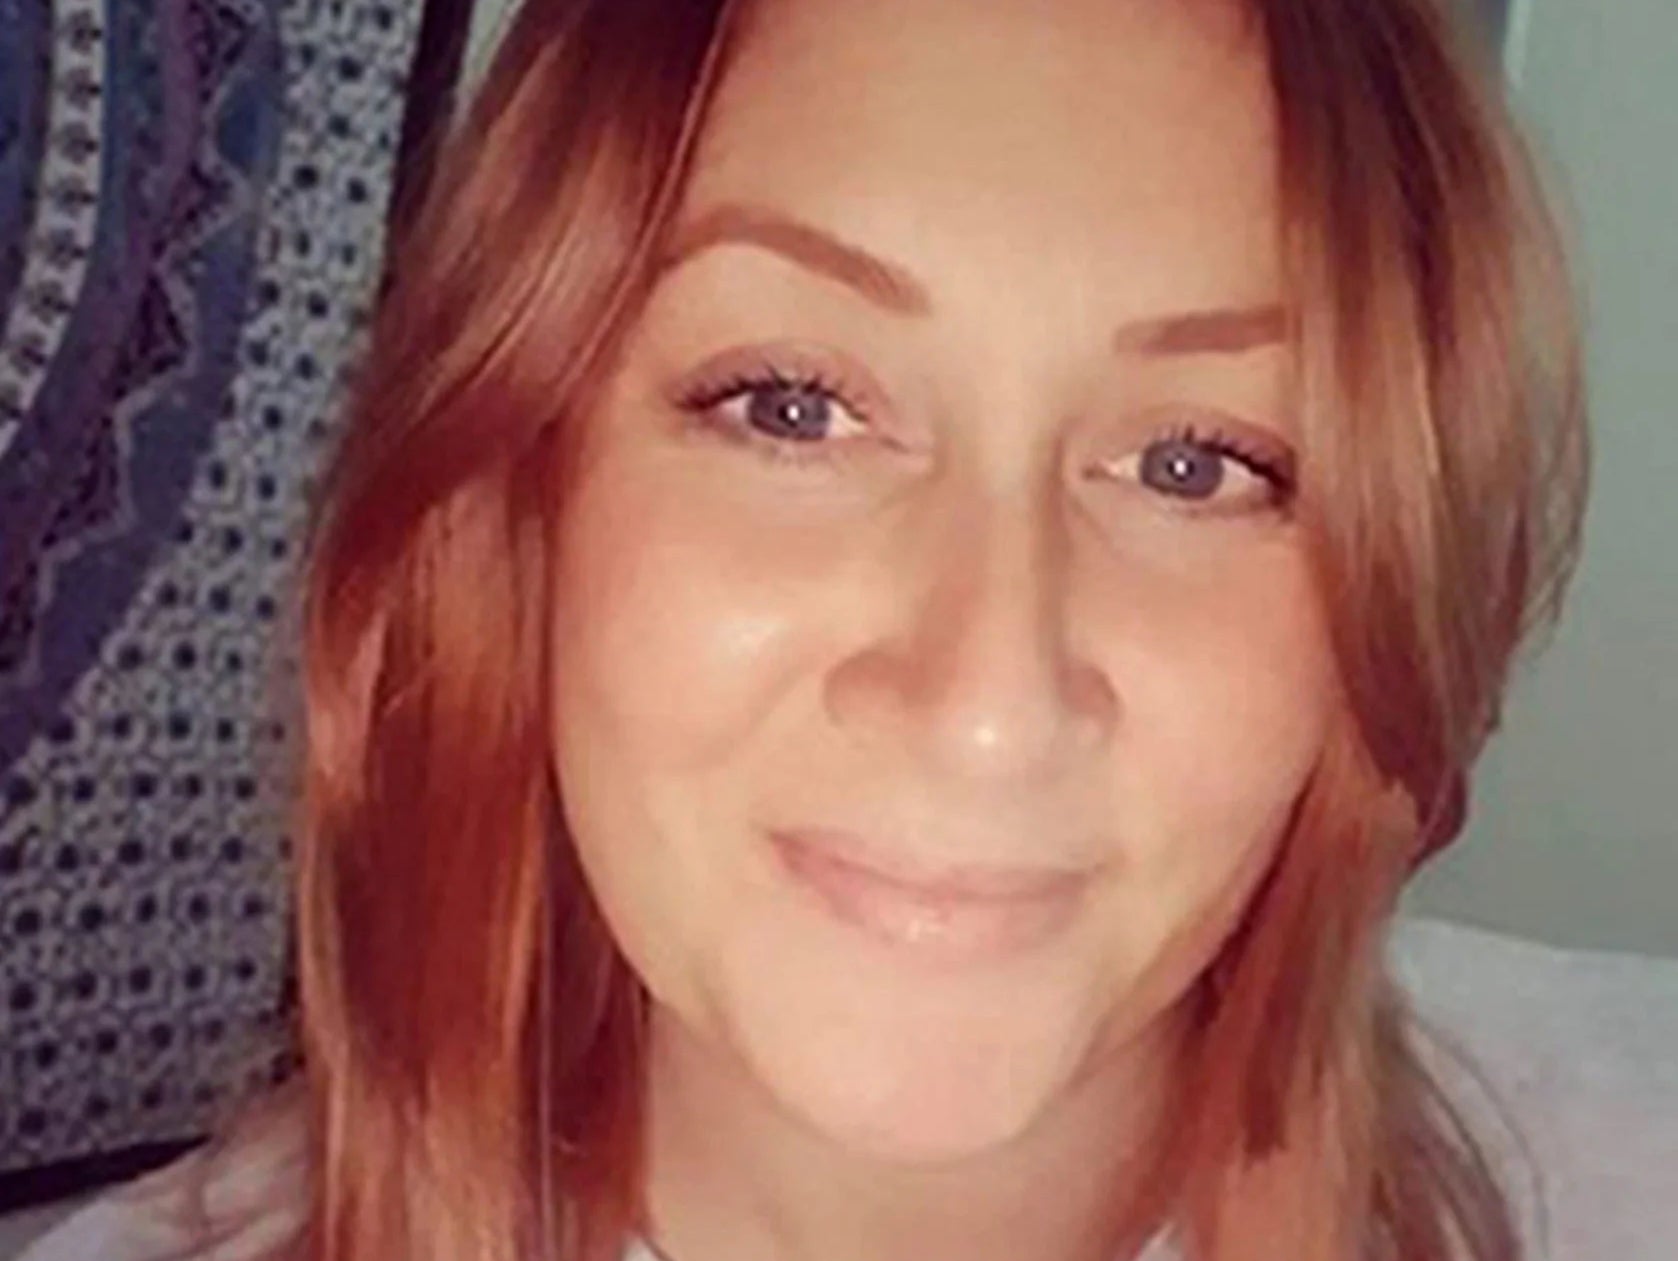 A man is under arrest as police search for Katie Kenyon who went missing Friday